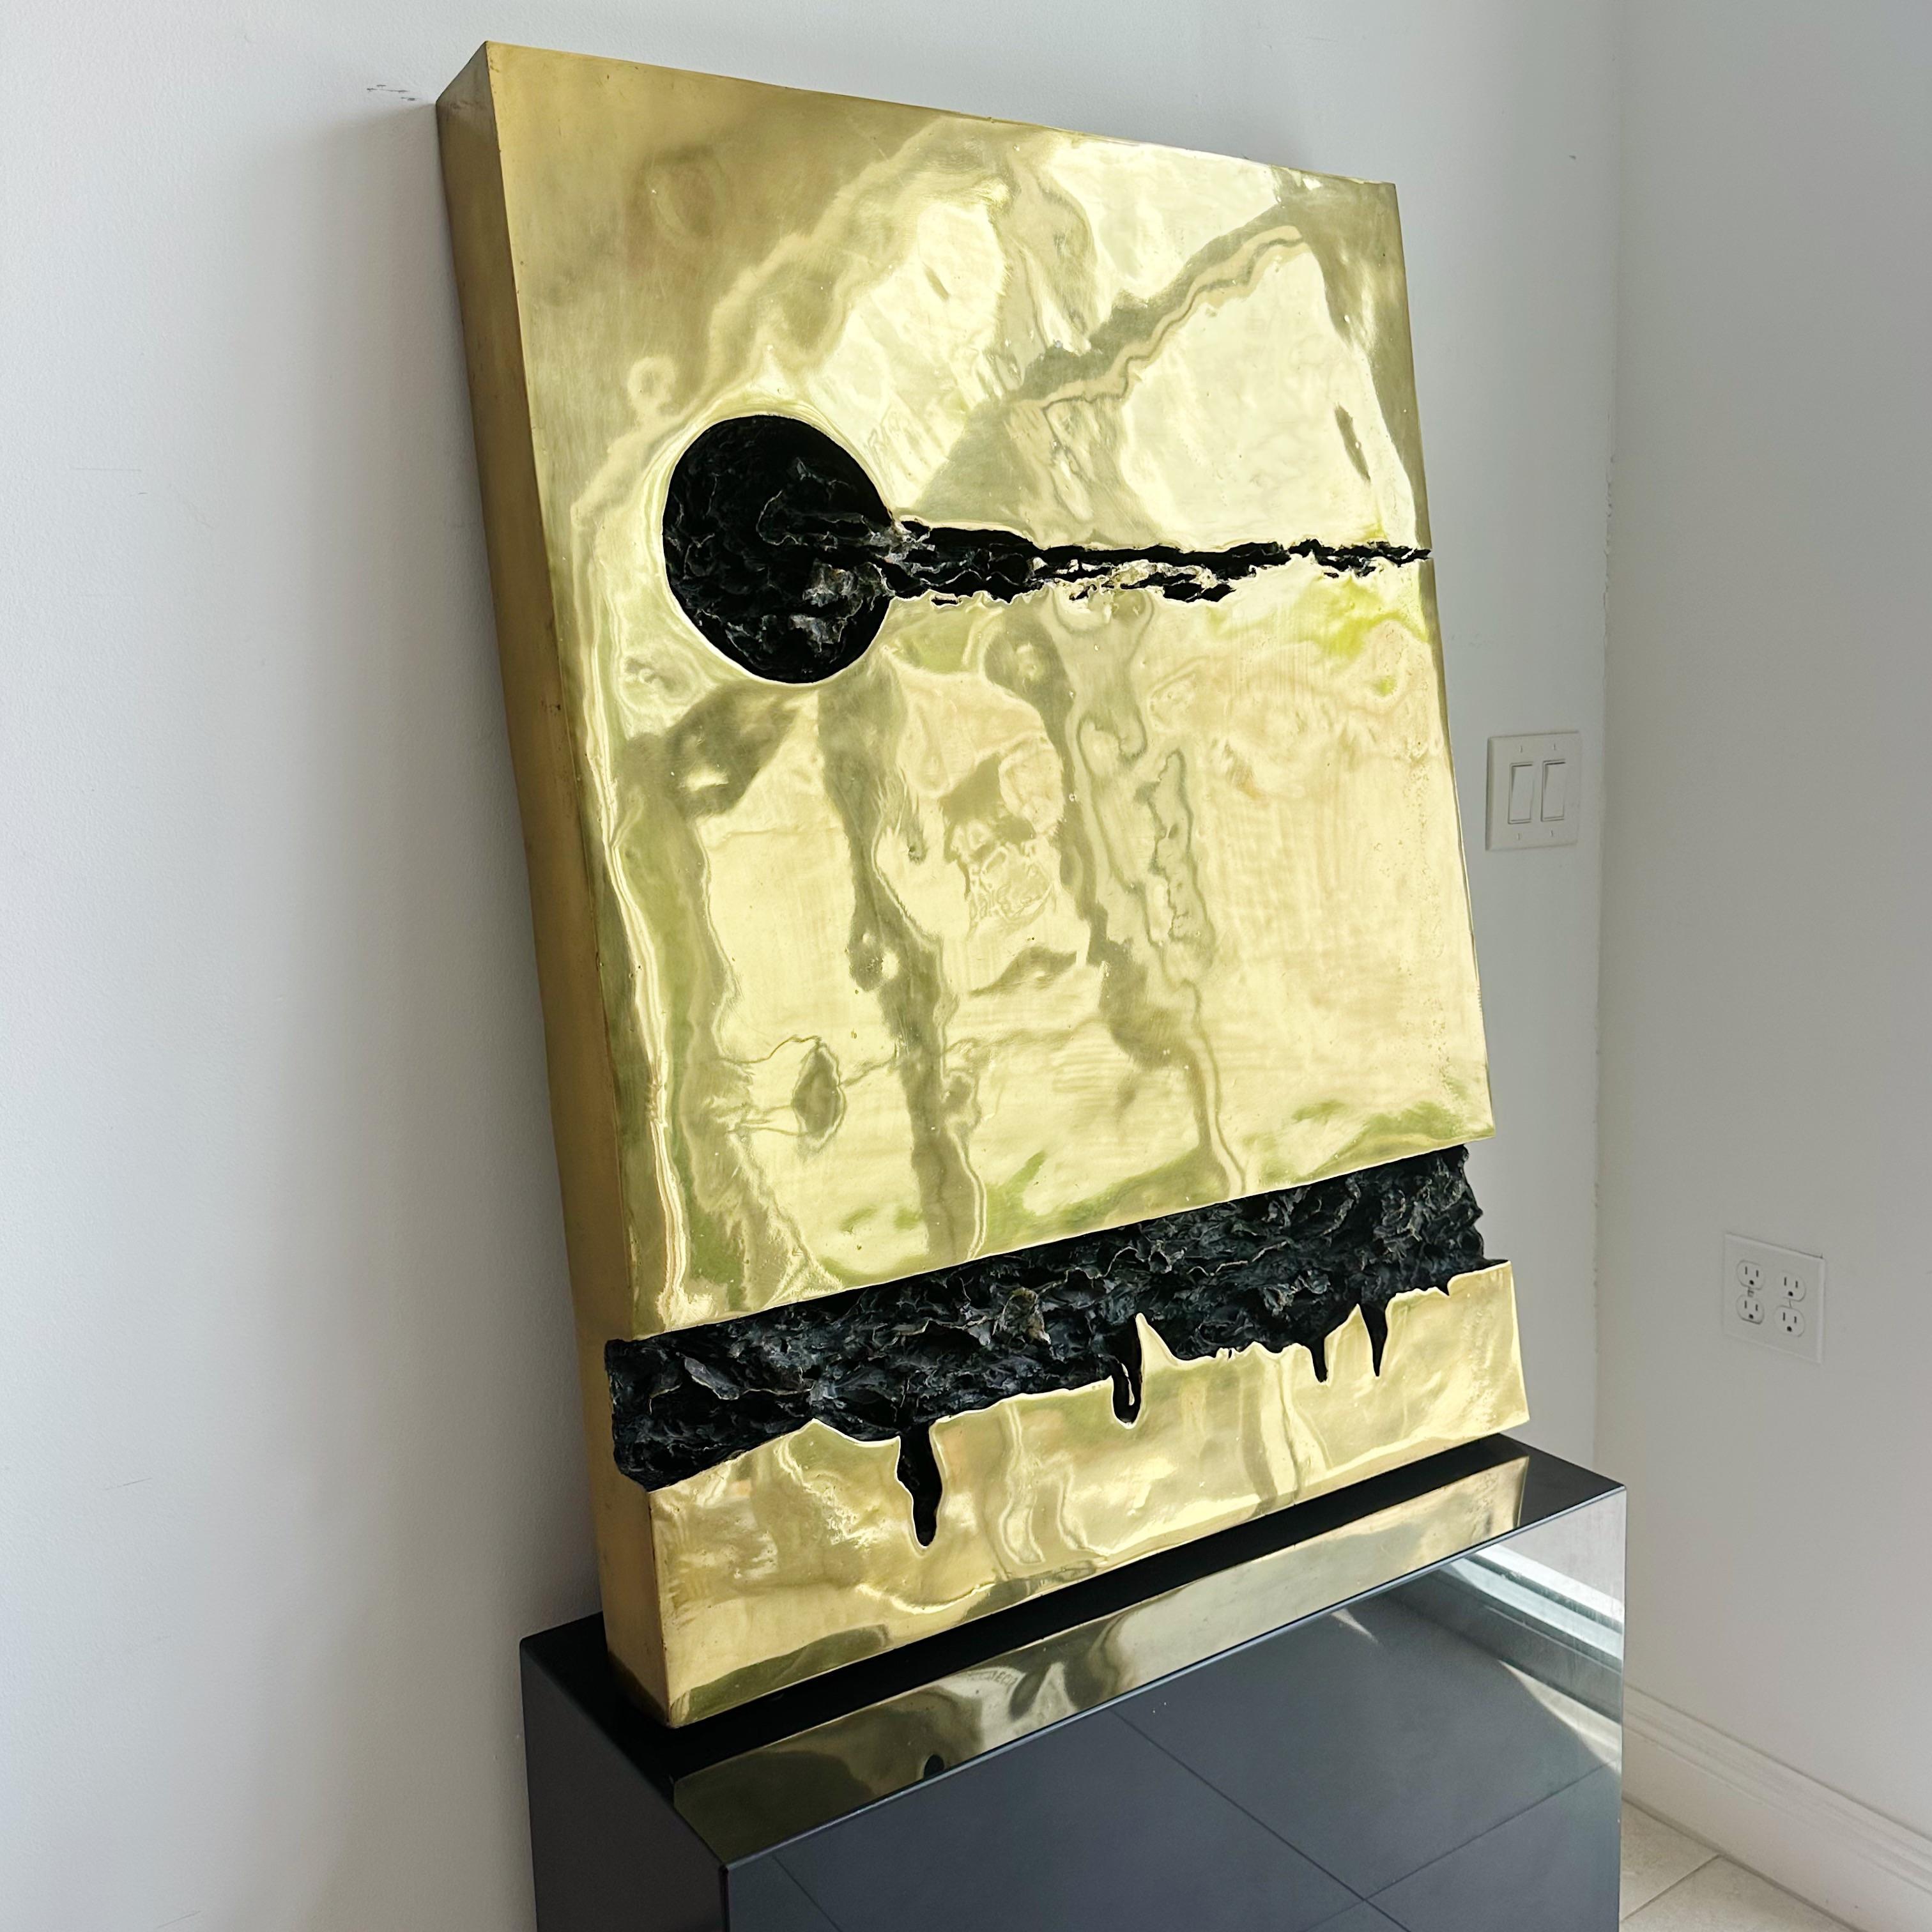 Mid Century Large Bronze Brutalist Sculpture
From the late 1970s, this brutalist sculpture is made of dark and gold bronze. Its fractured design stands out, and the piece offers versatility for wall mounting or plinth placement. Notably heavy, it's